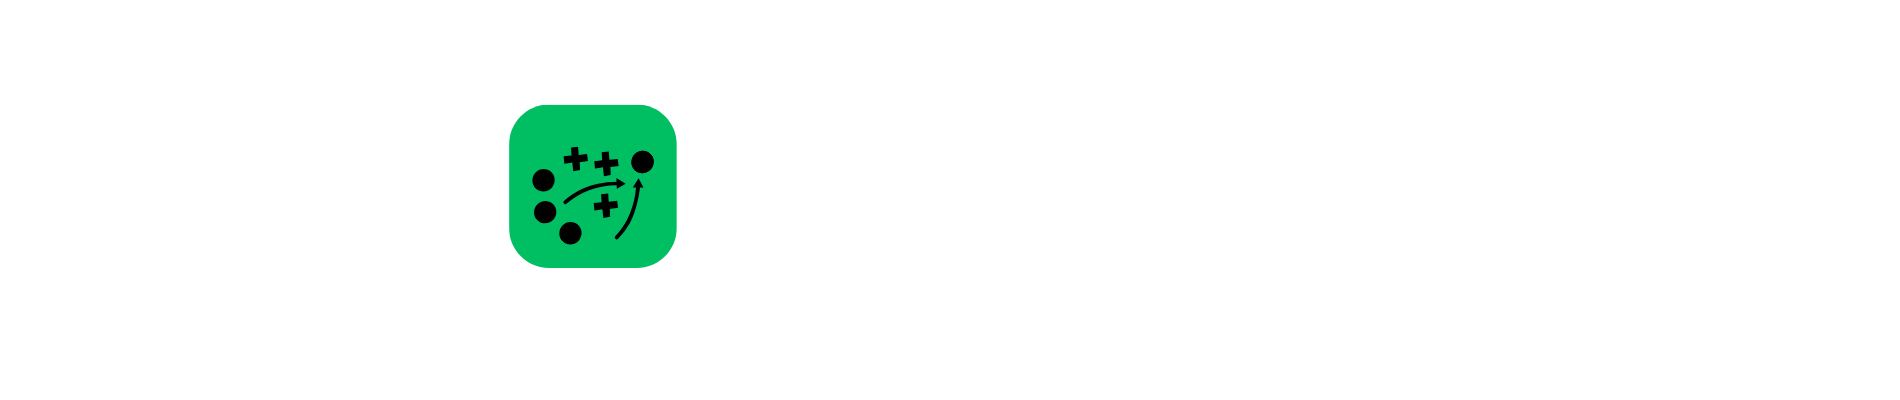 The Recruiting Playbook